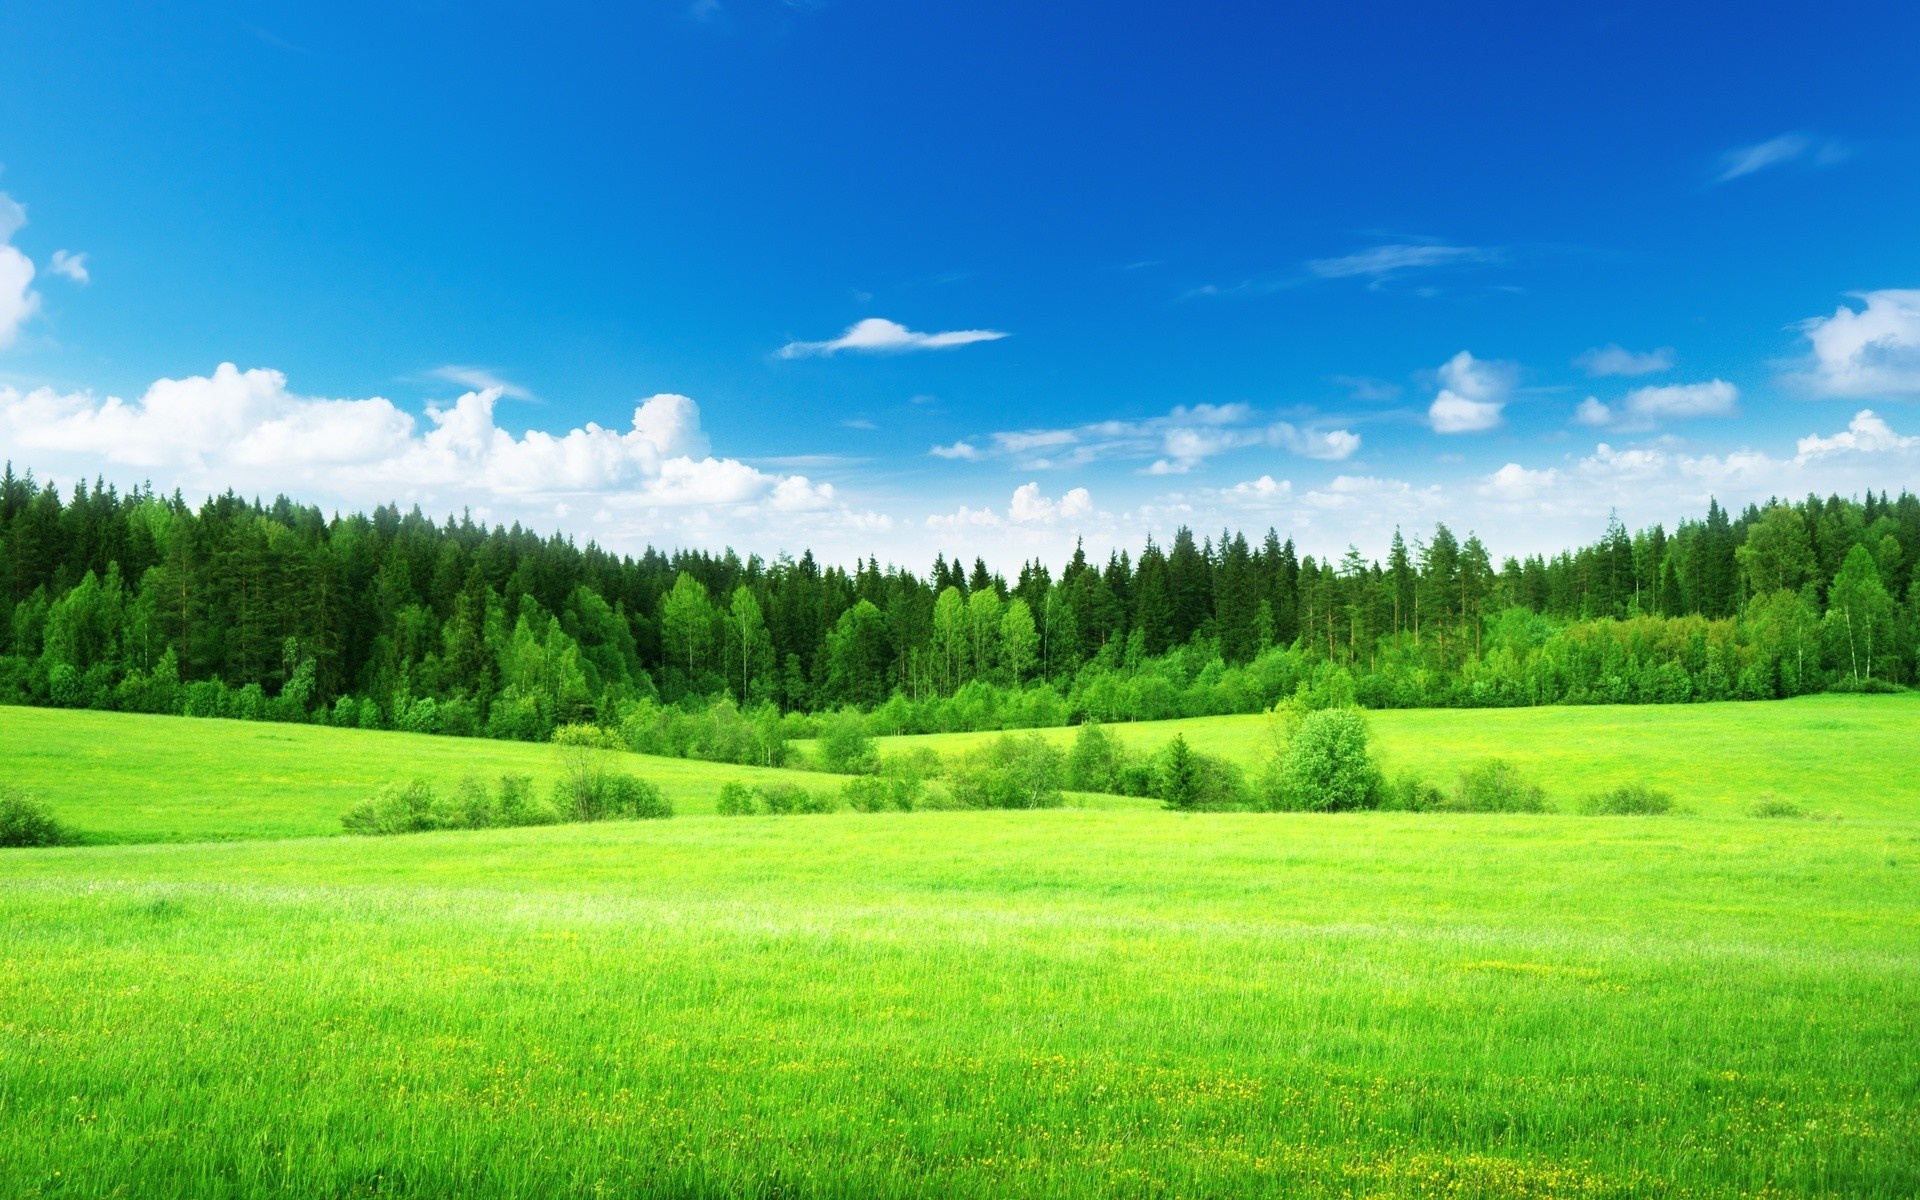 Grass and Sky: Nature, Landscape, Green Trees, Clouds, Woodland, Forest, Outback. 1920x1200 HD Wallpaper.